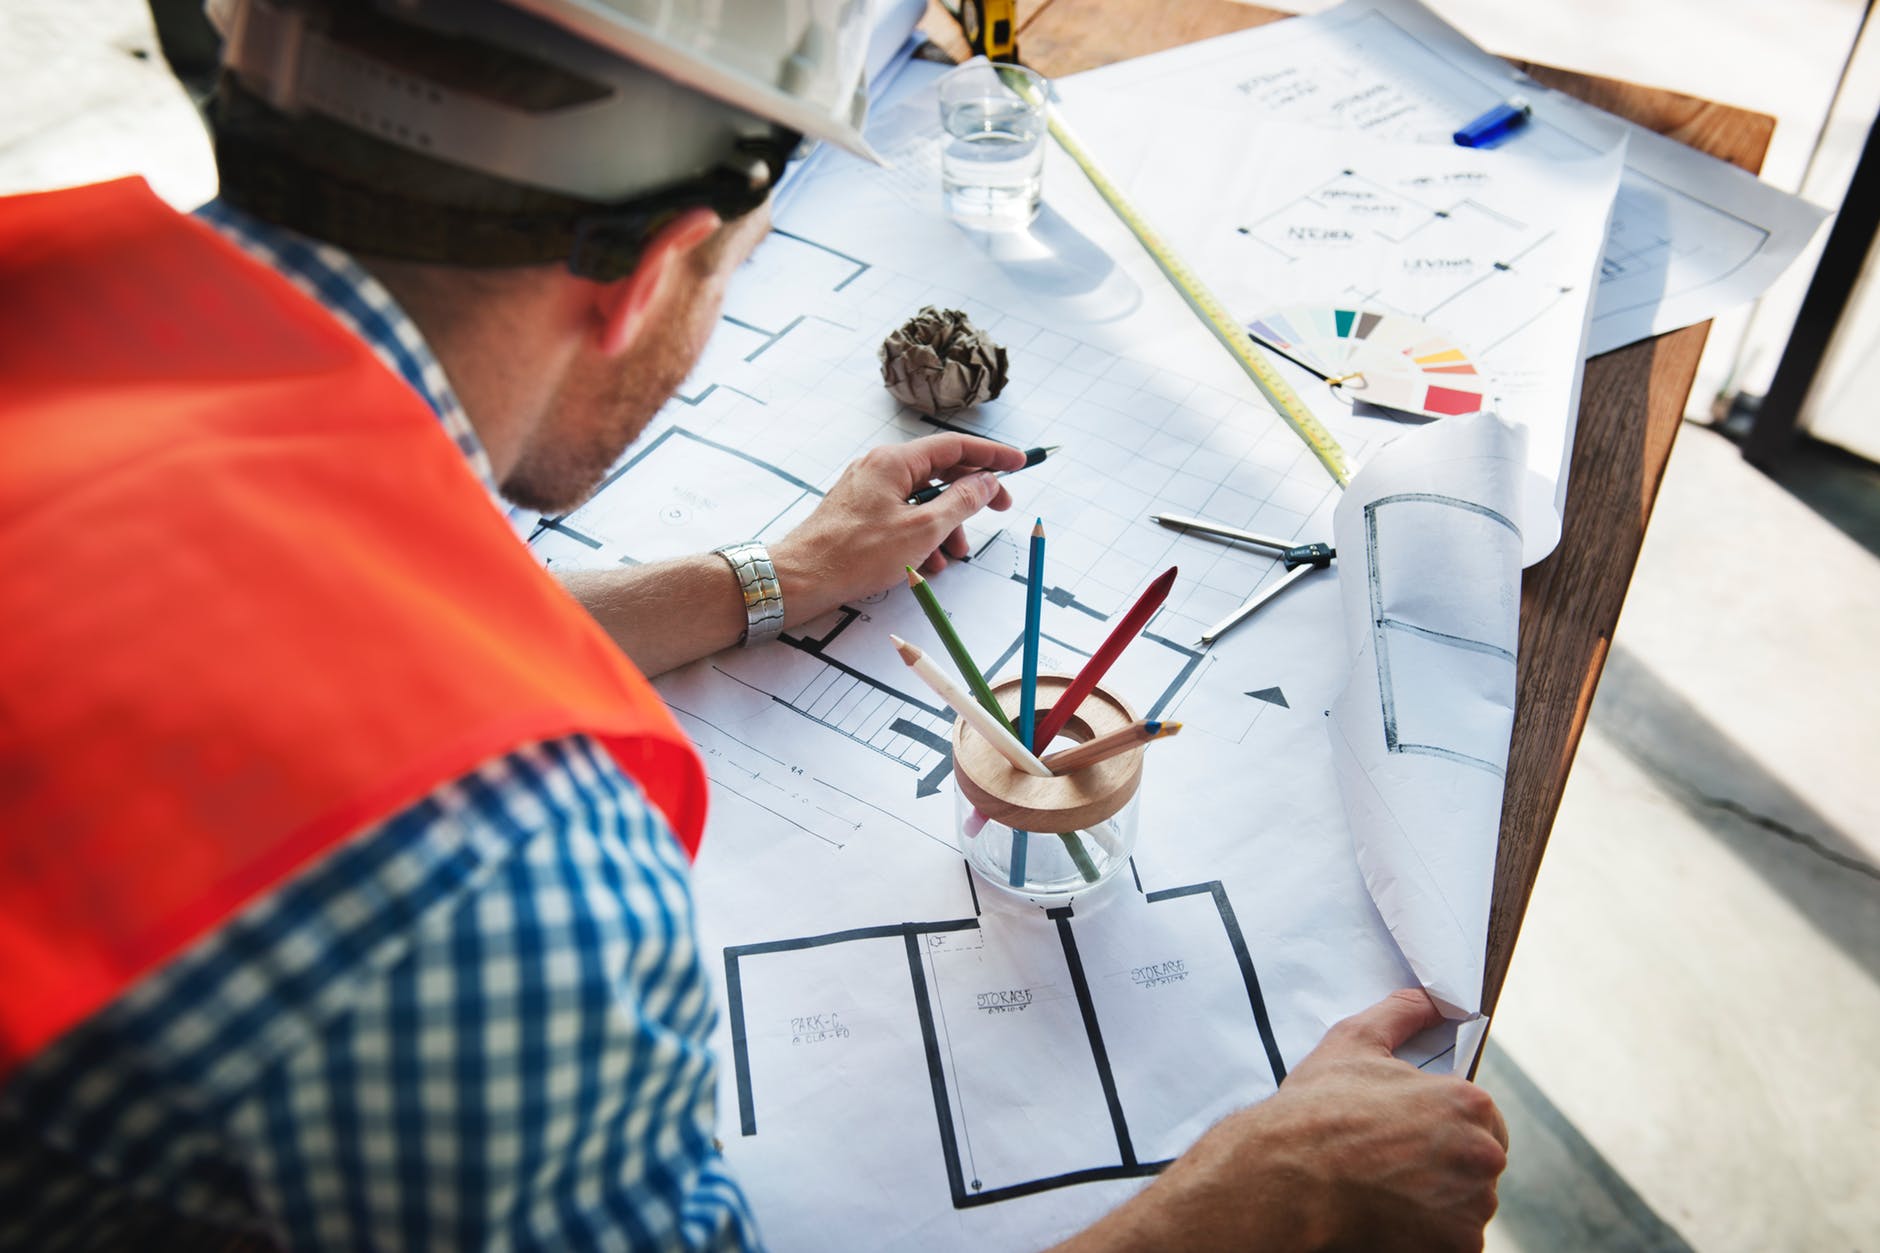 What You Should Consider When Hiring a Contractor for Home Improvement